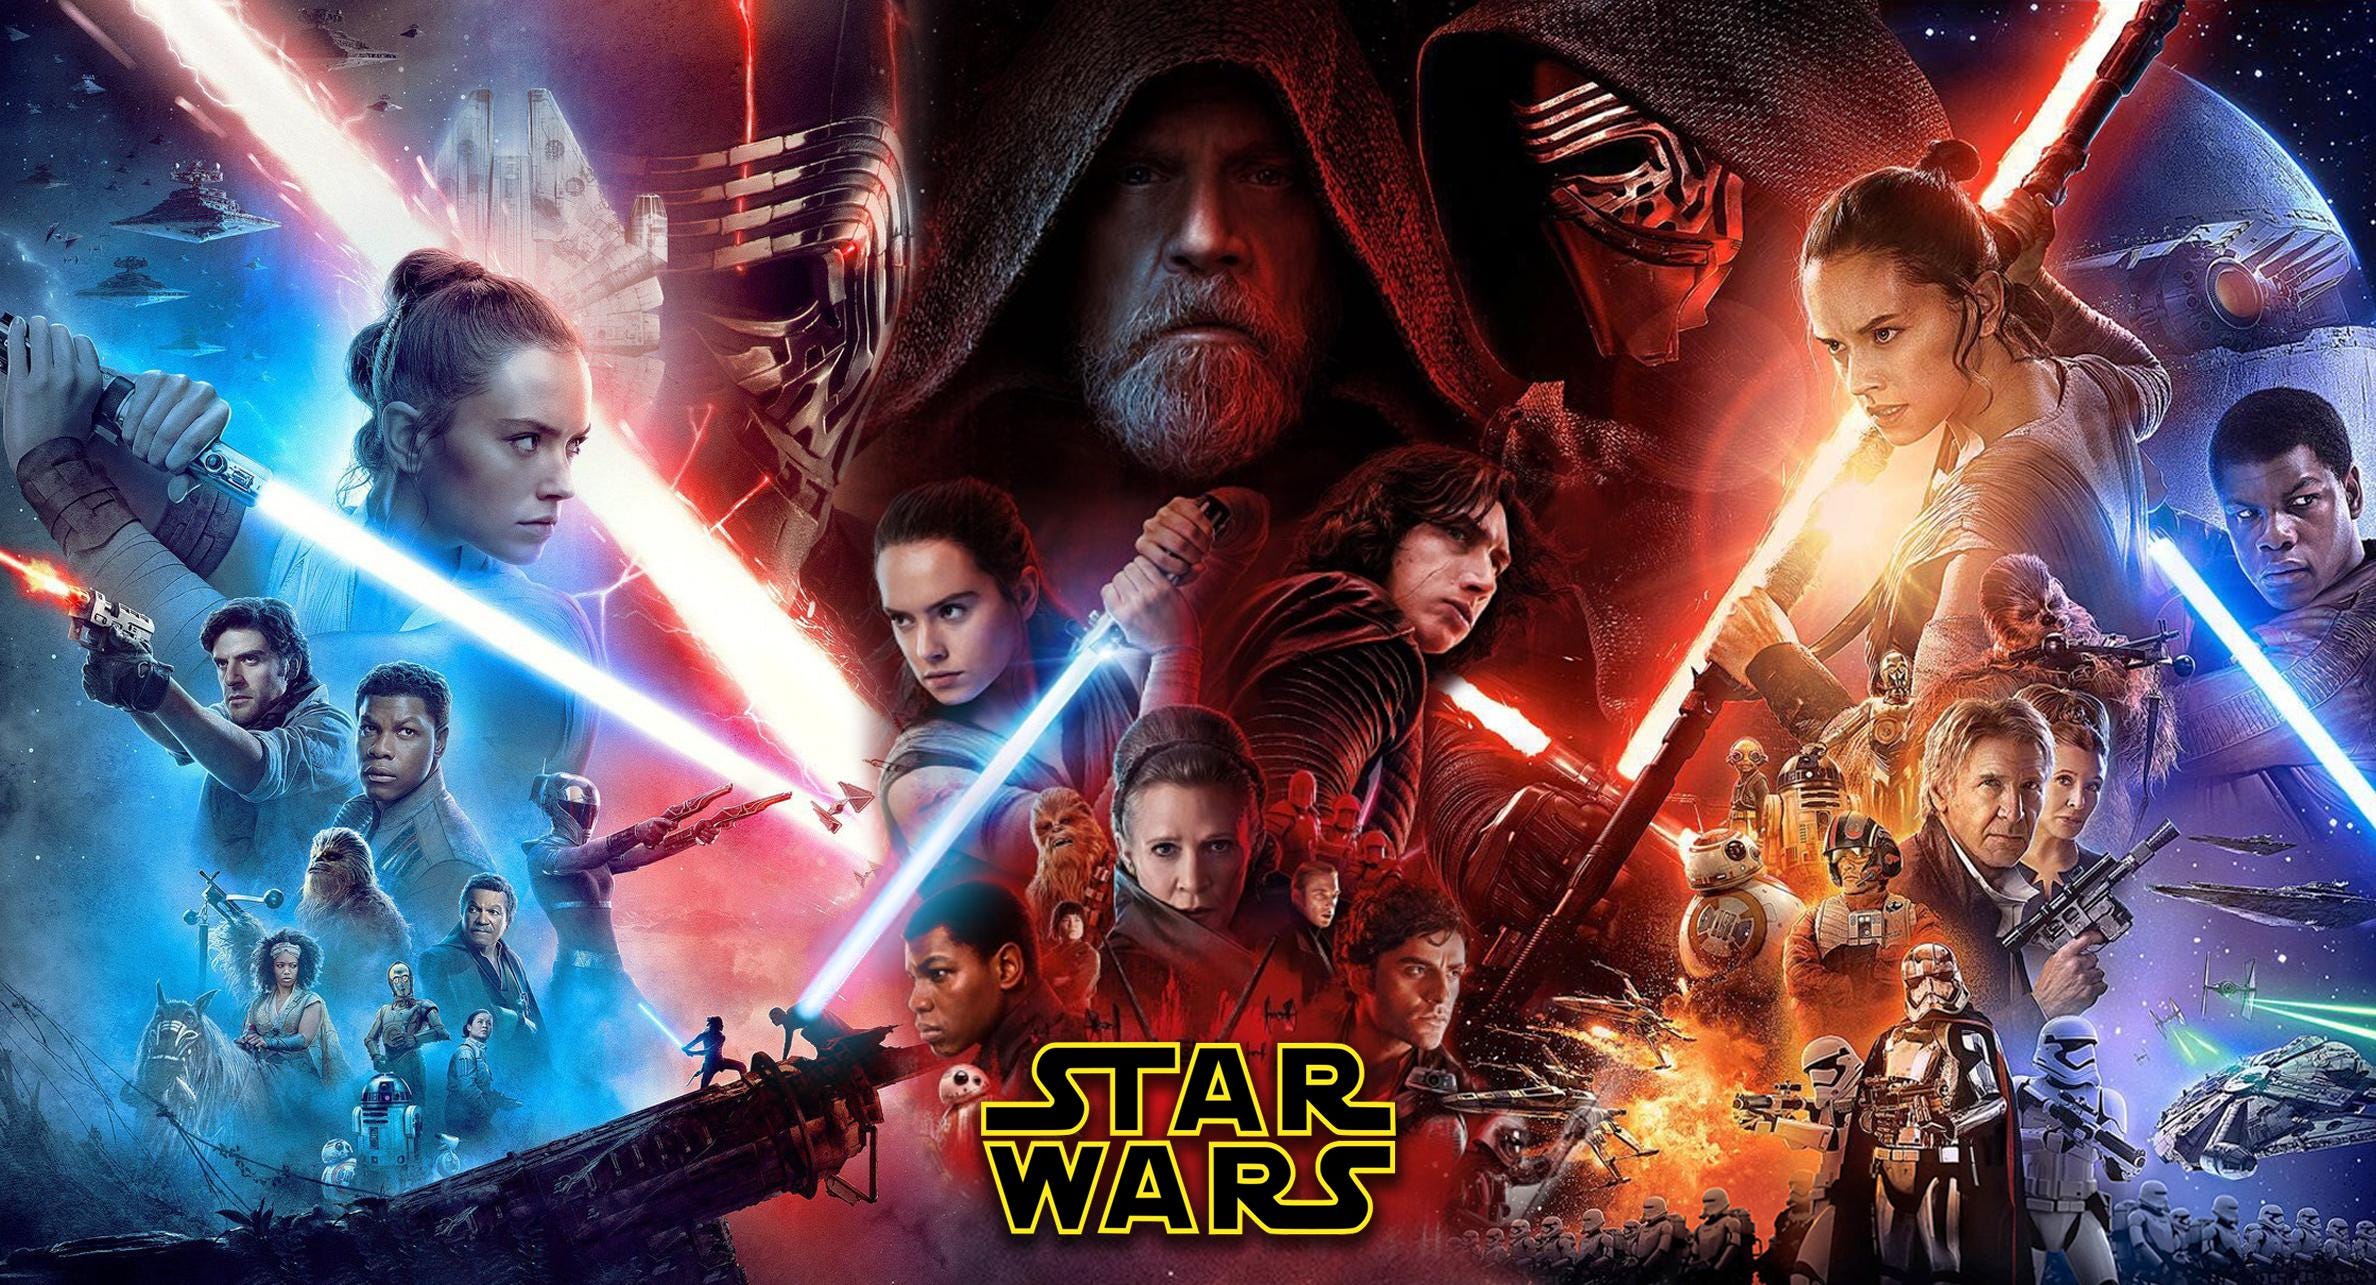 First Impression: Star Wars 3 - Revenge of the Sith